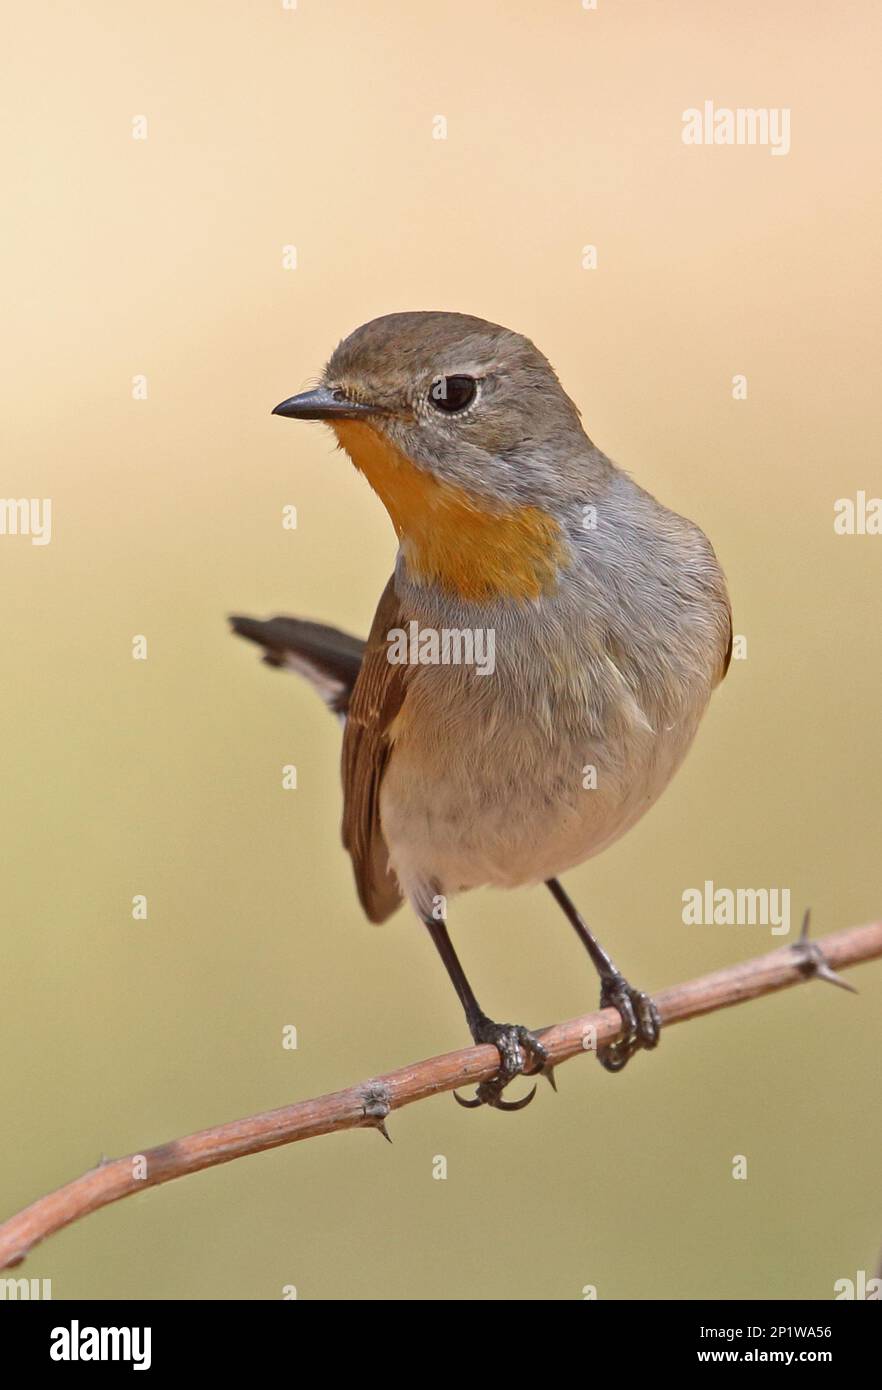 Taiga Flycatcher (Ficedula albicilla) adult male on a branchHebei, China May 2016 Stock Photo